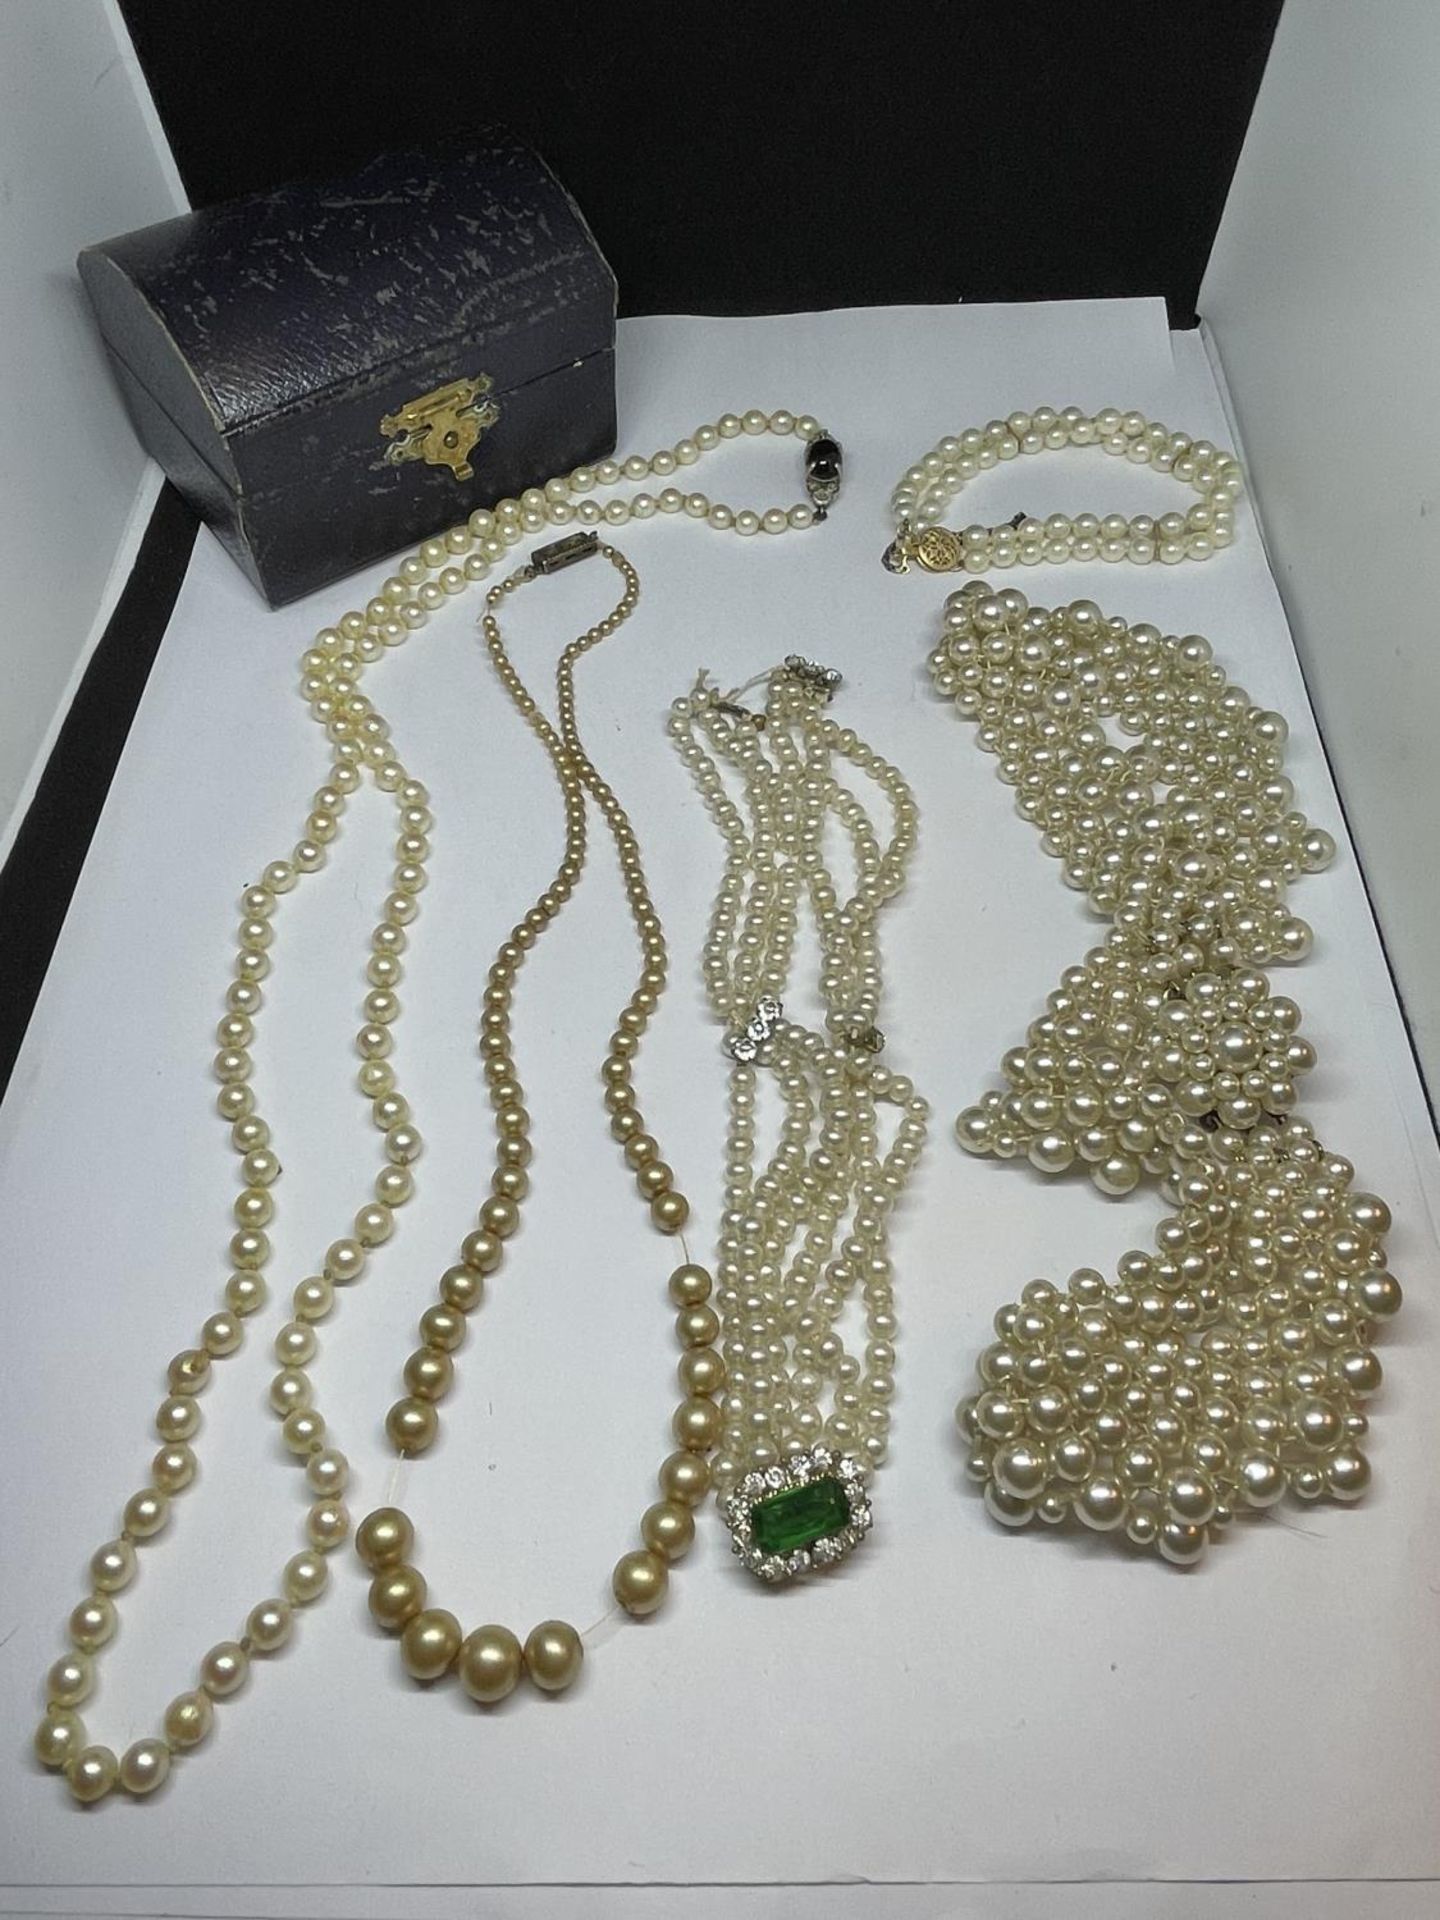 THREE PEARL NECKLACES, A CHOKER AND BRACELET WITH A PRESENTATION BOX